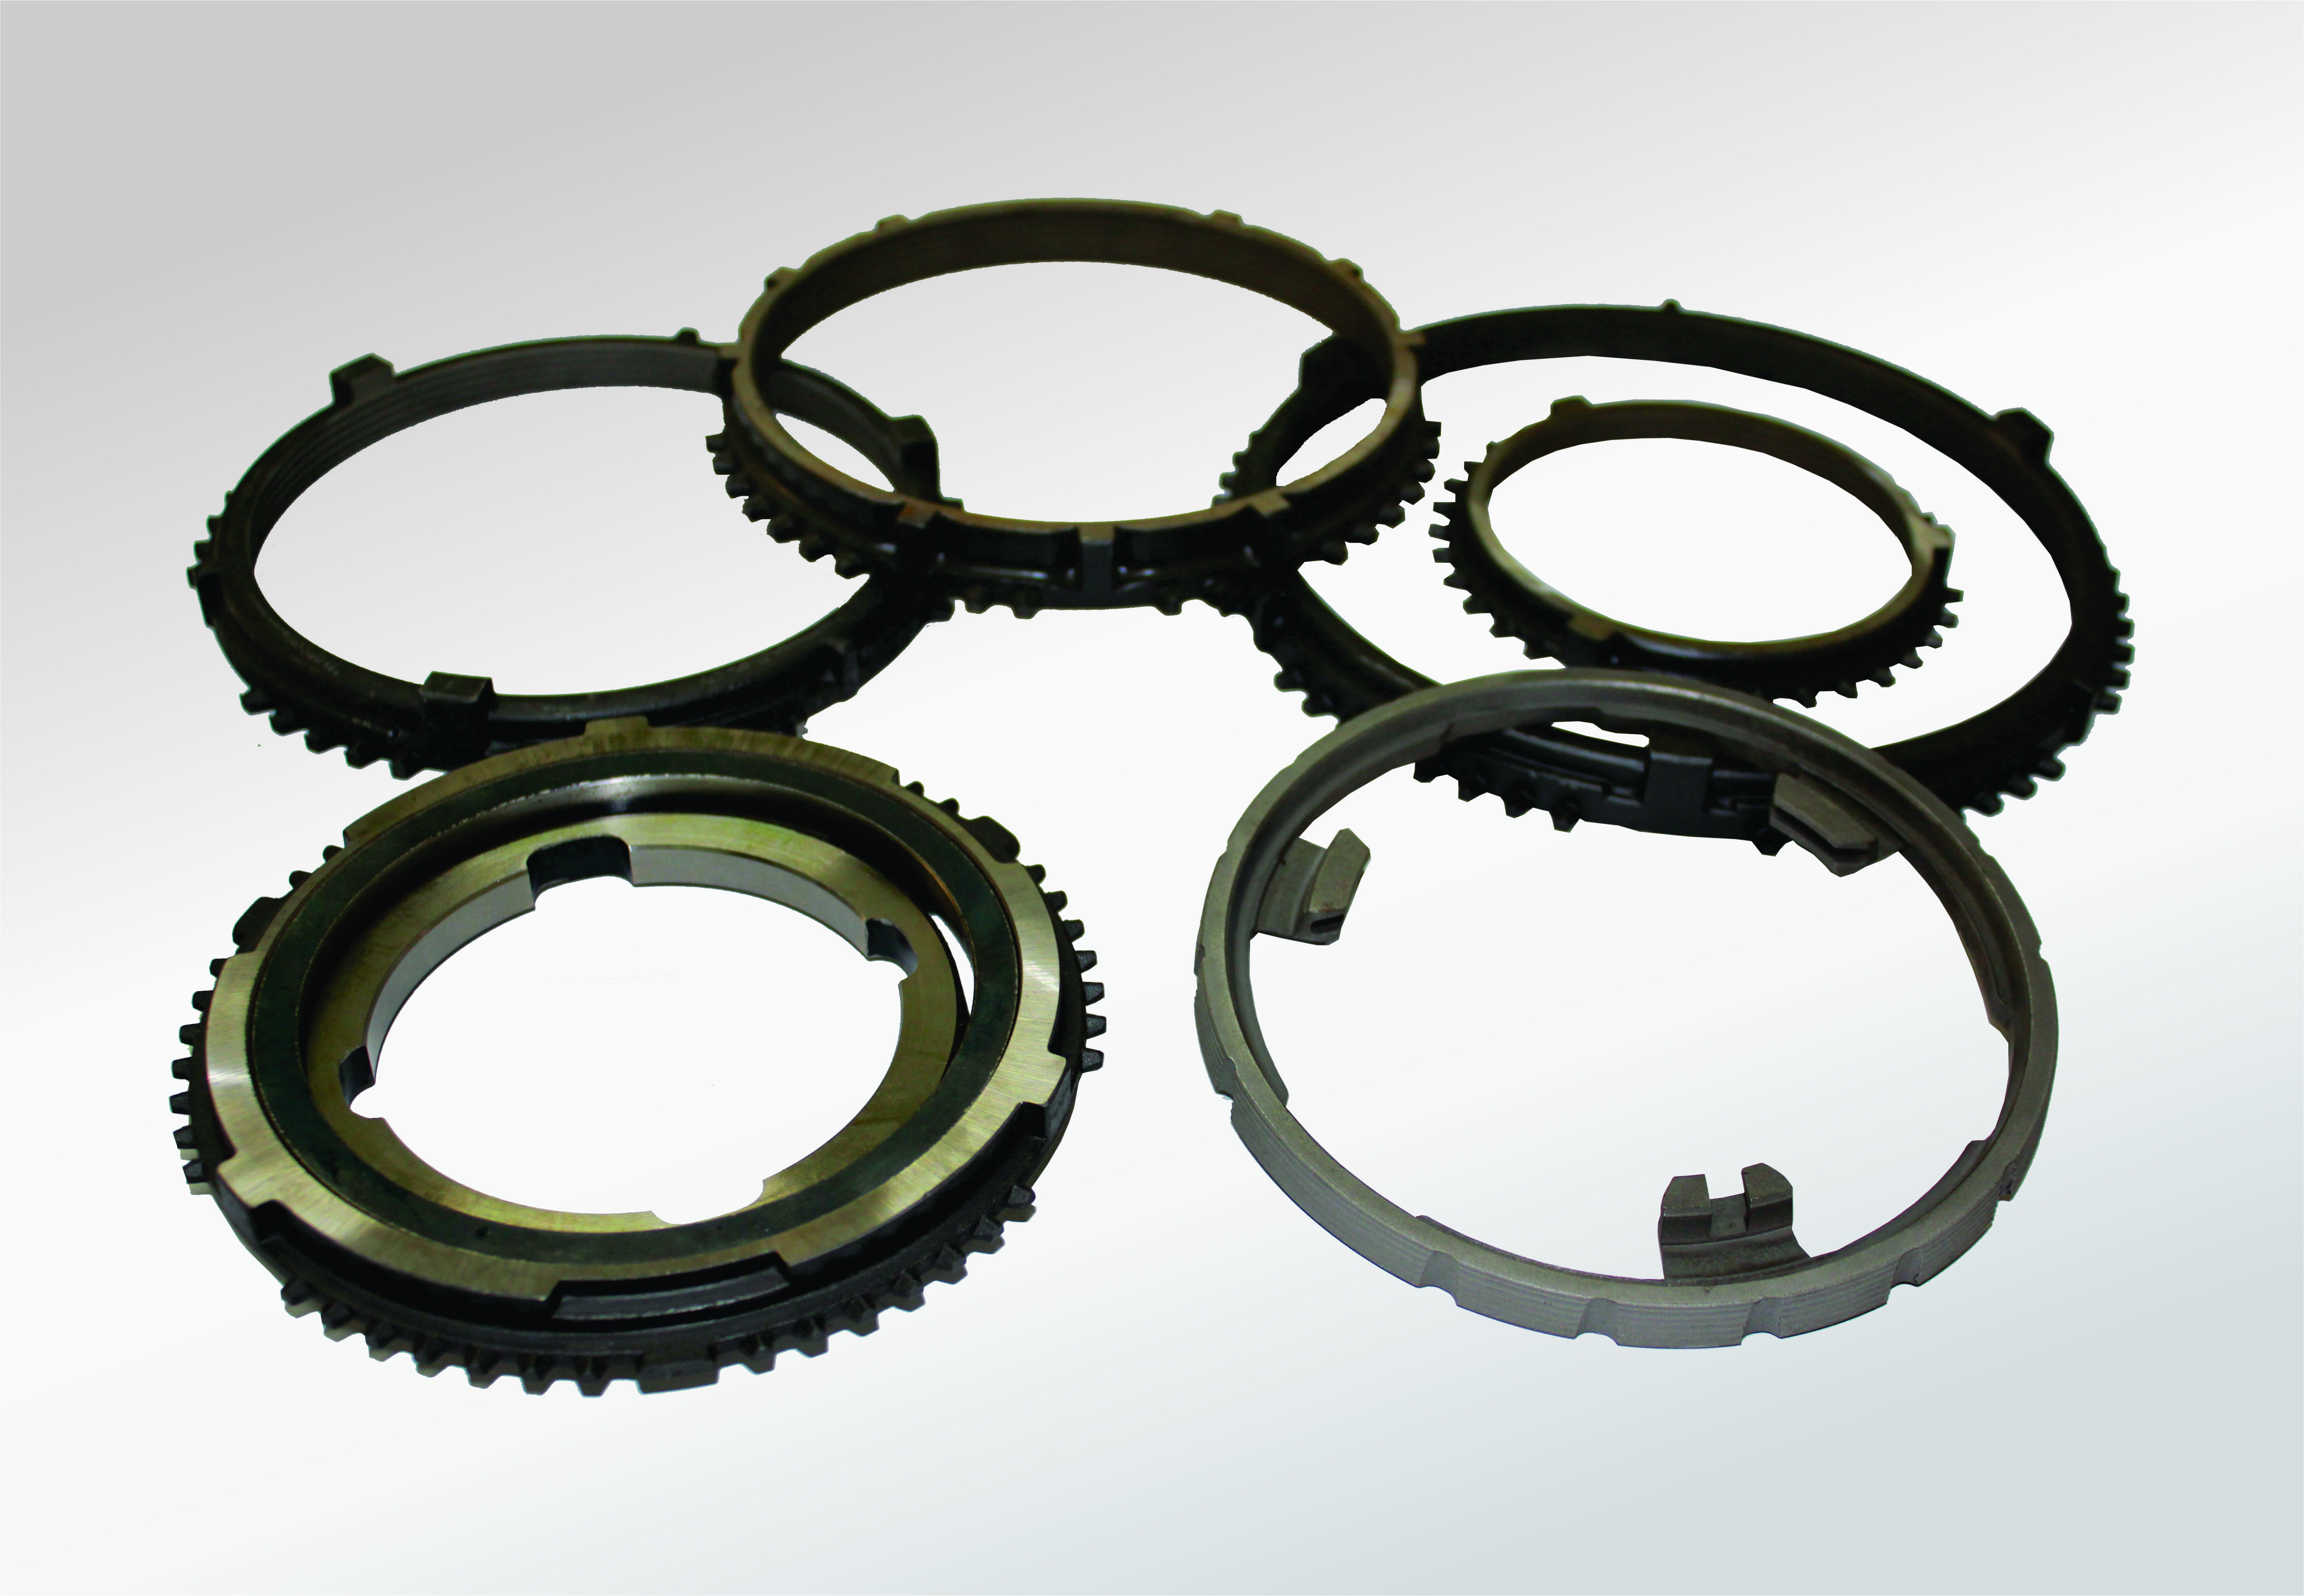 Forgings Ghaziabad Crankshafts Gears & Wheels Rounds Shafts Steel Ring  Pinion Blanks Connecting Rods